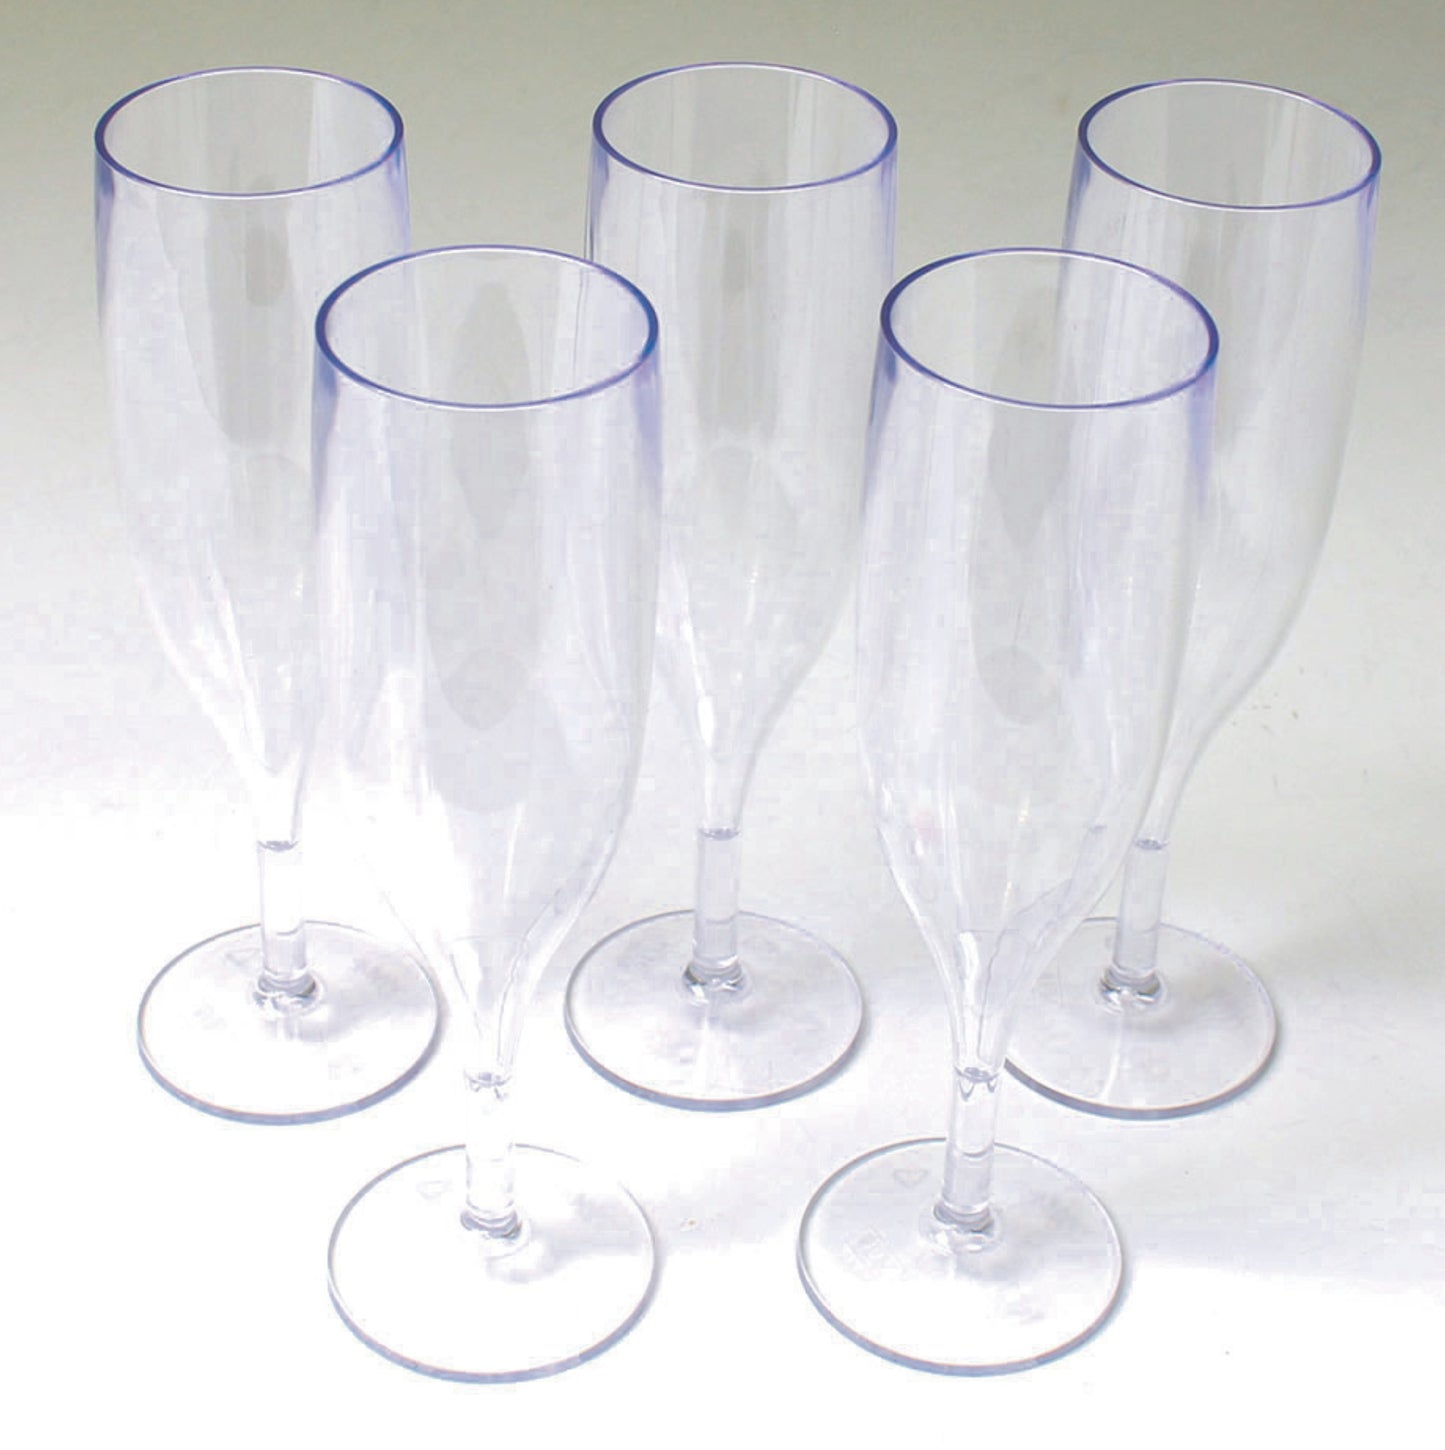 25 x Clear Prosecco Flutes – 175ml CE Marked at 125ml, Strong Reusable Plastic Transparent 1-Piece Champagne Glass (Pack of 25 Glasses)-5056020186175-EY-PP-065-Product Pro-Clear Champagne Flutes, Clear Flutes, Clear Prosecco Flutes, Reusable Flutes